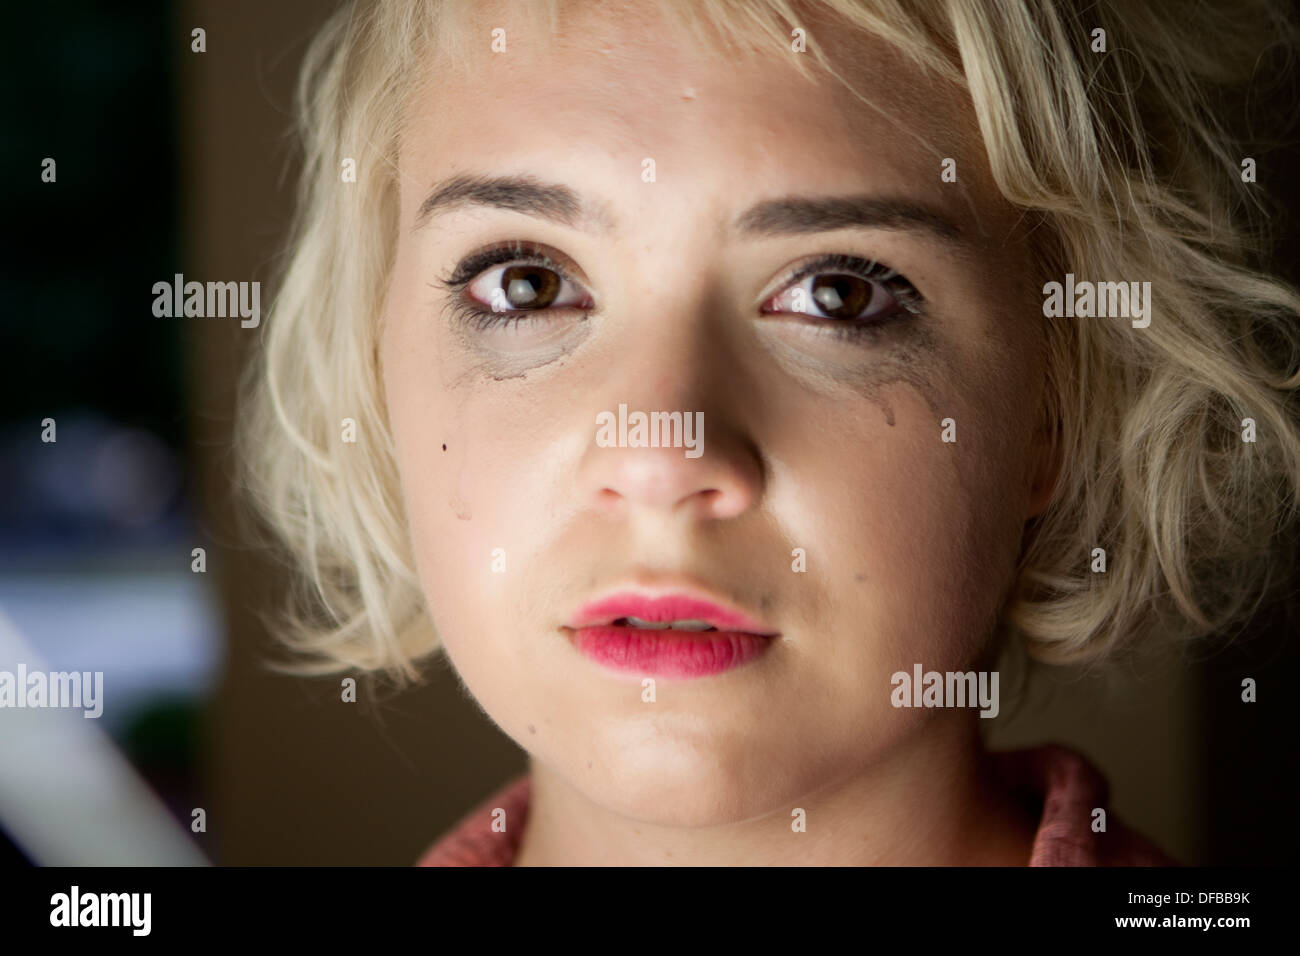 9 year old blond female face closeup with tears and runny makeup visibly in  emotional distress, sad, looking straight into you Stock Photo - Alamy